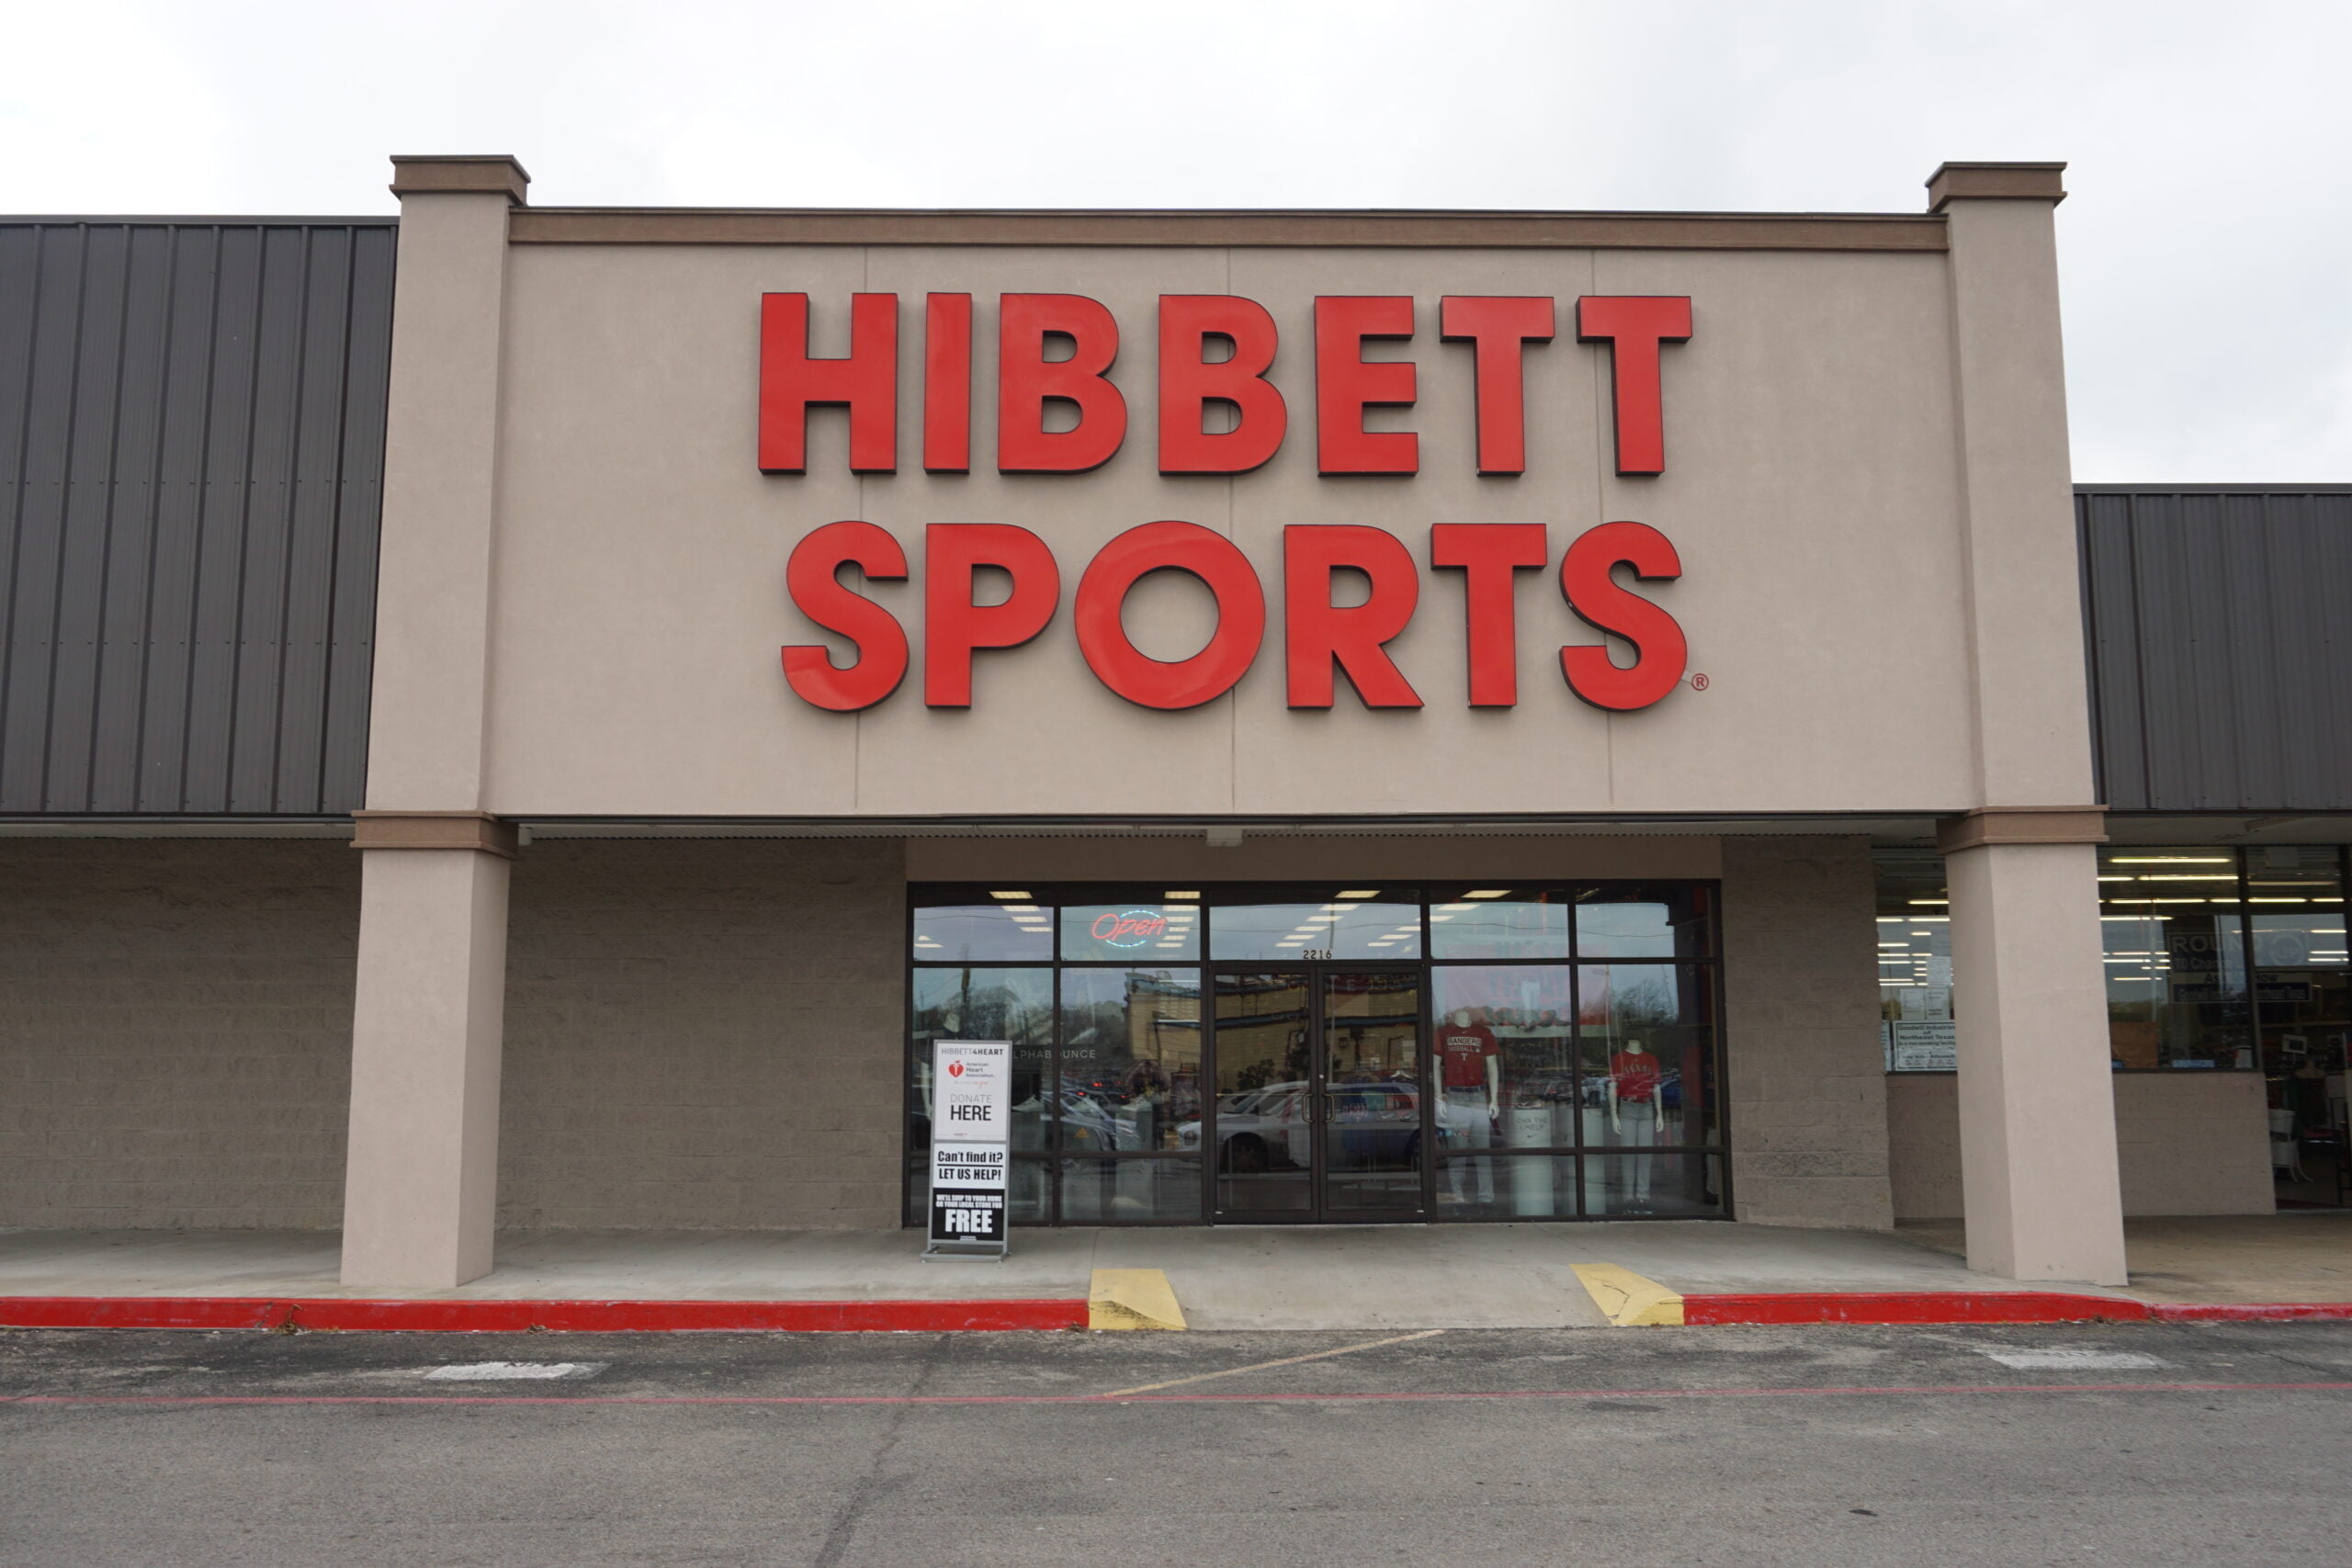 Does Hibbett Sports sell work boots?